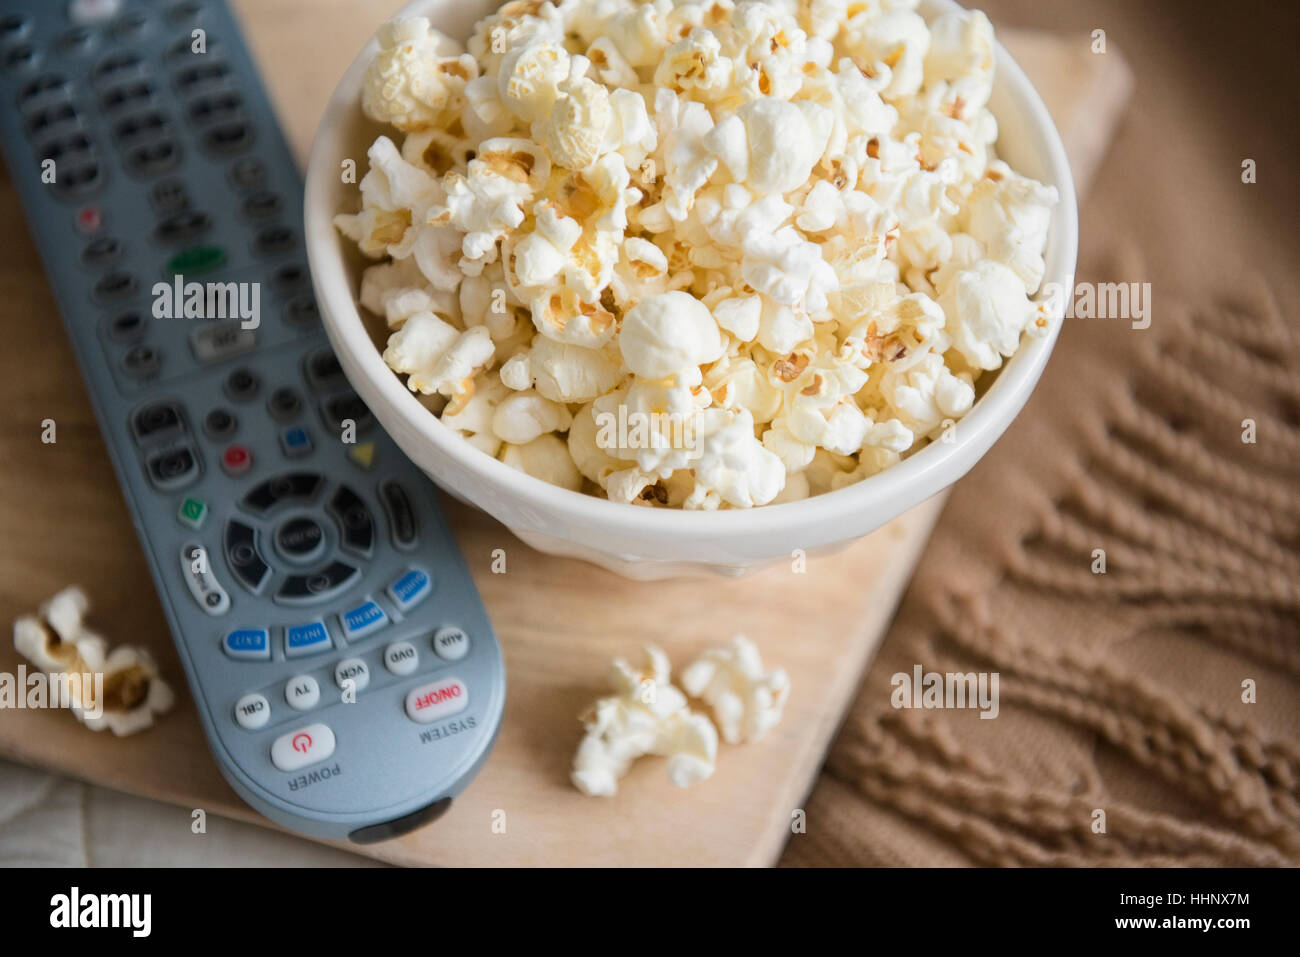 Bowl of popcorn and remote control Stock Photo